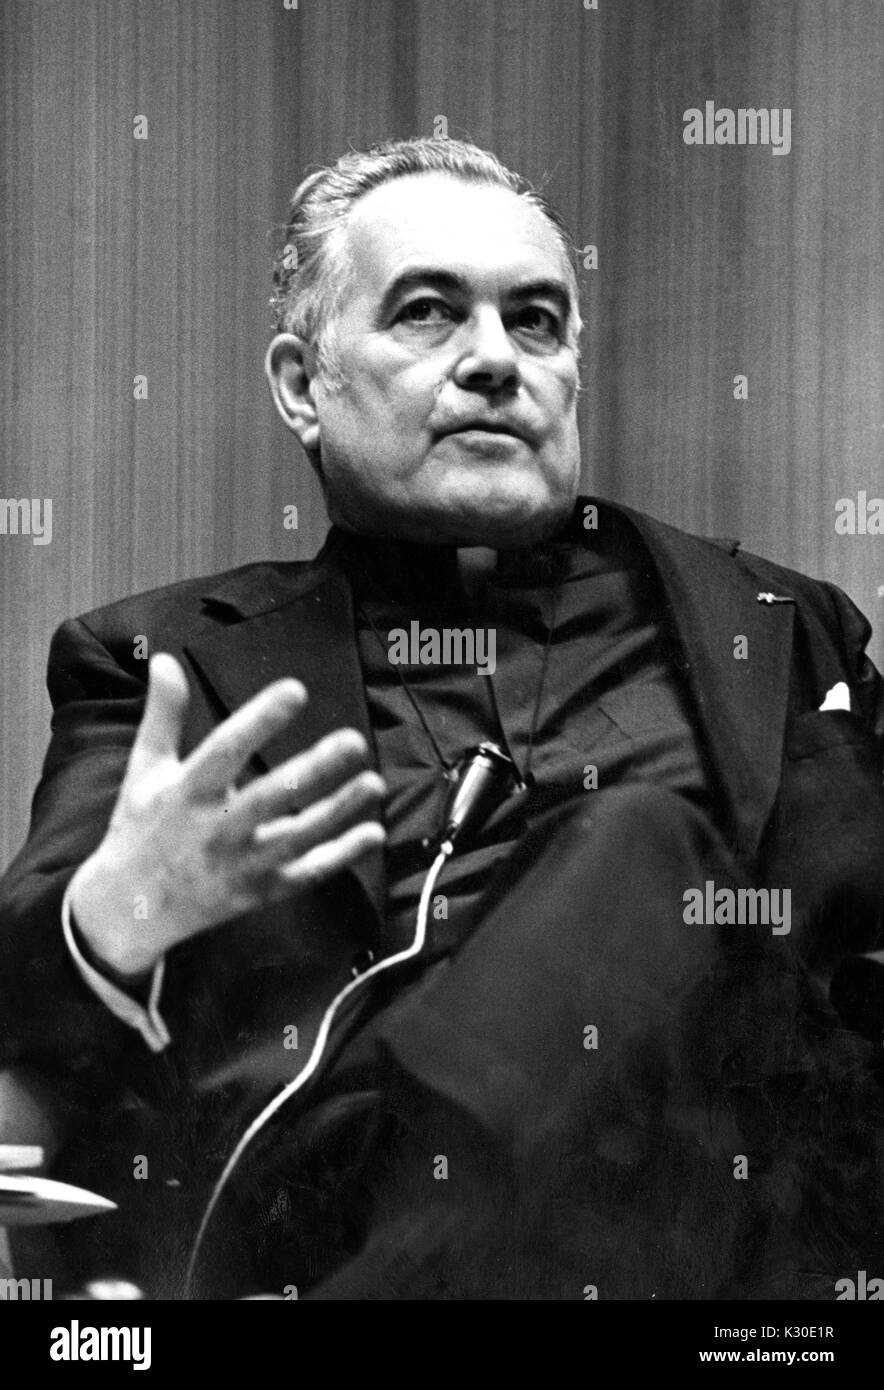 A half body portrait of Father Theodore Hesburgh looking serious at the American University Symposium, Washington DC, February 21, 1976. Stock Photo